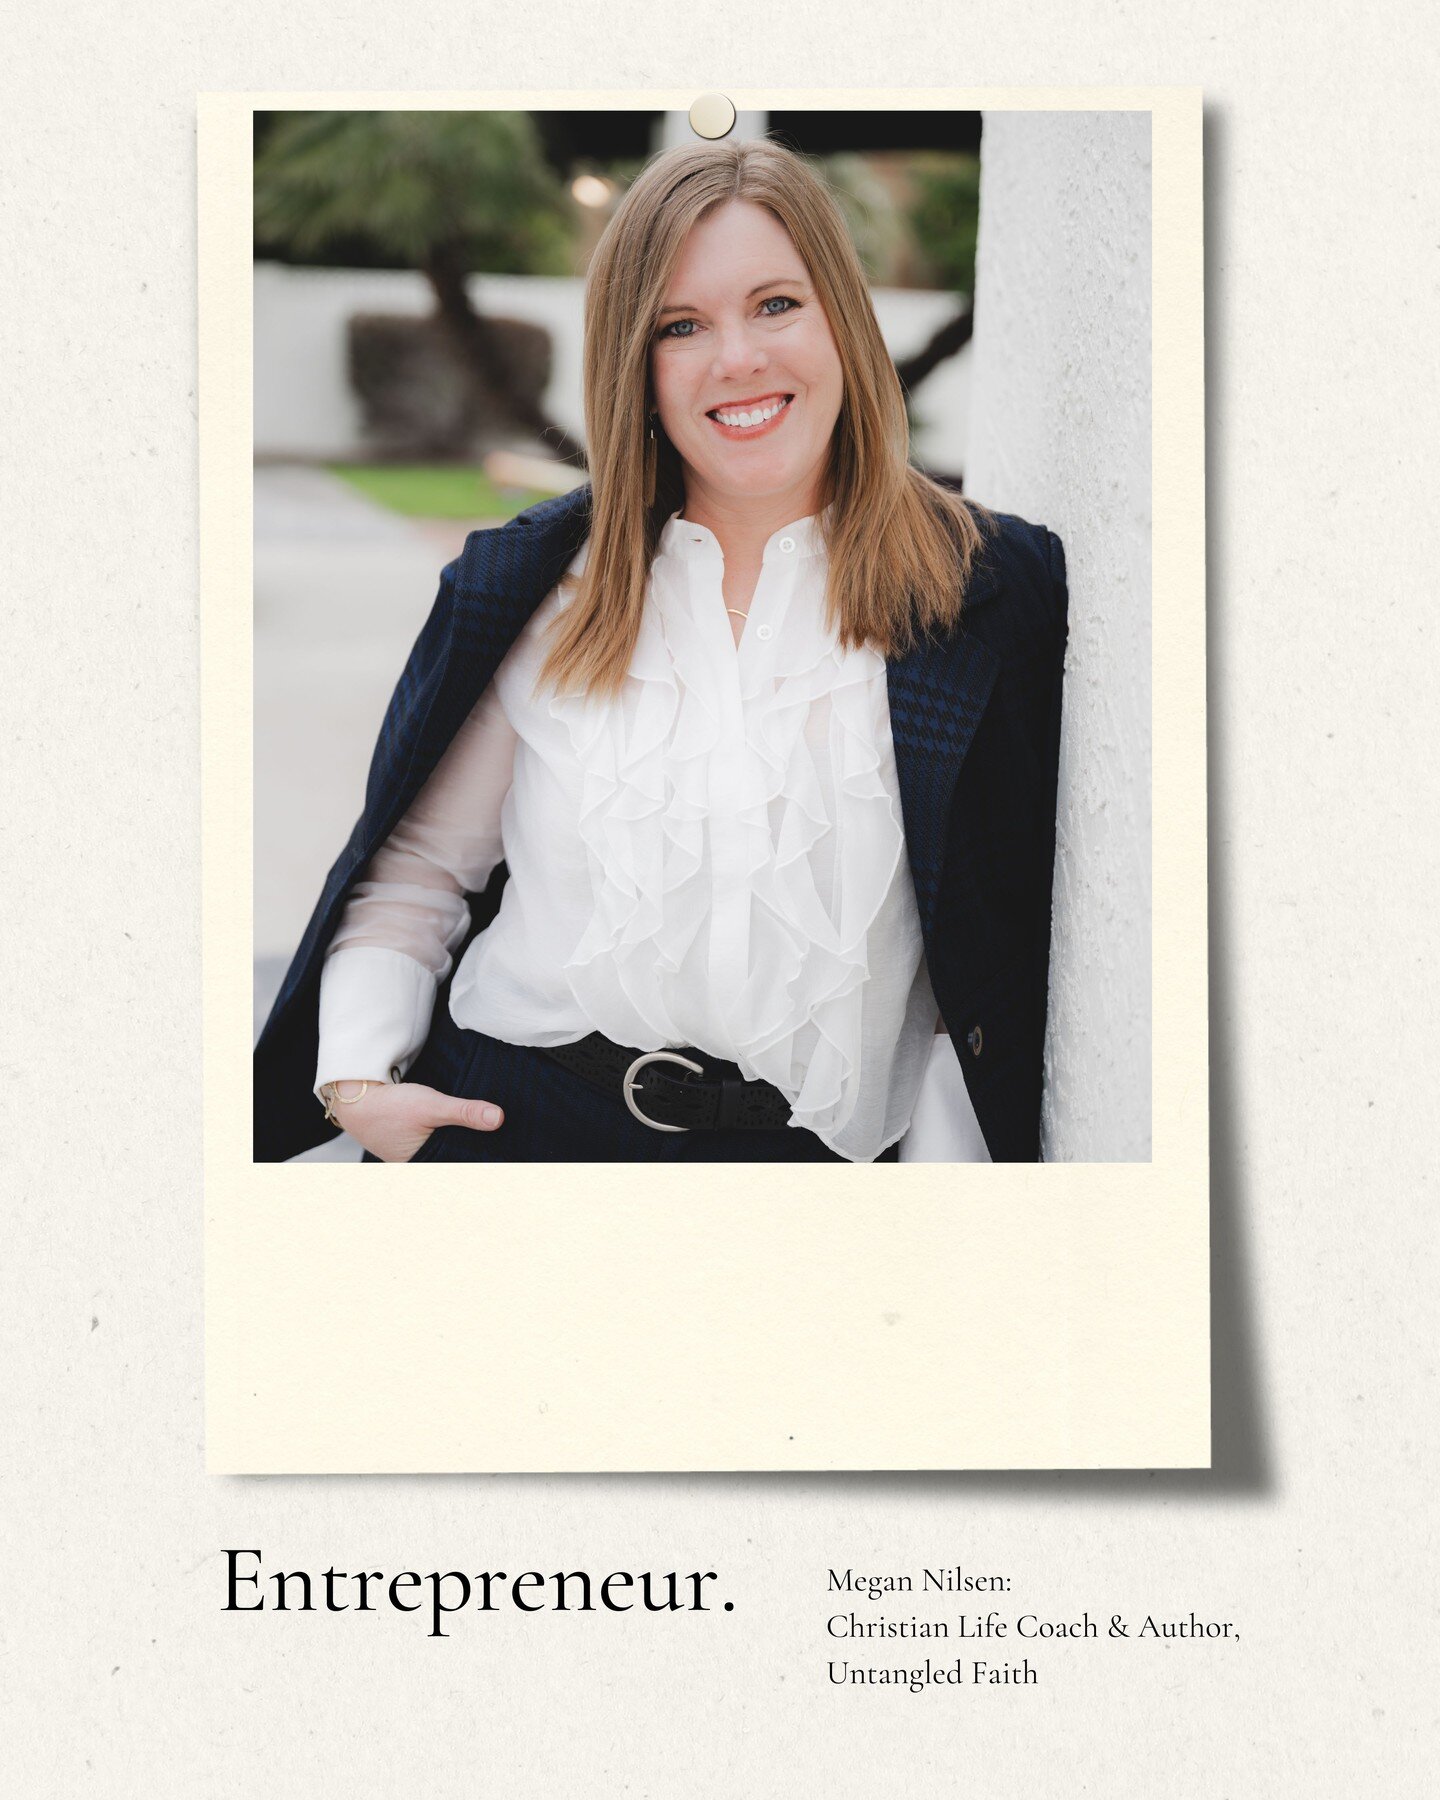 Entrepreneur Spotlight:
Meet Megan Nilsen, Kingdom Life Coach. Megan helps women navigate their next season with deeper clarity, confidence, purpose, and peace. 
She helps her clients sort out their thoughts (and, isn&rsquo;t this the real struggle s